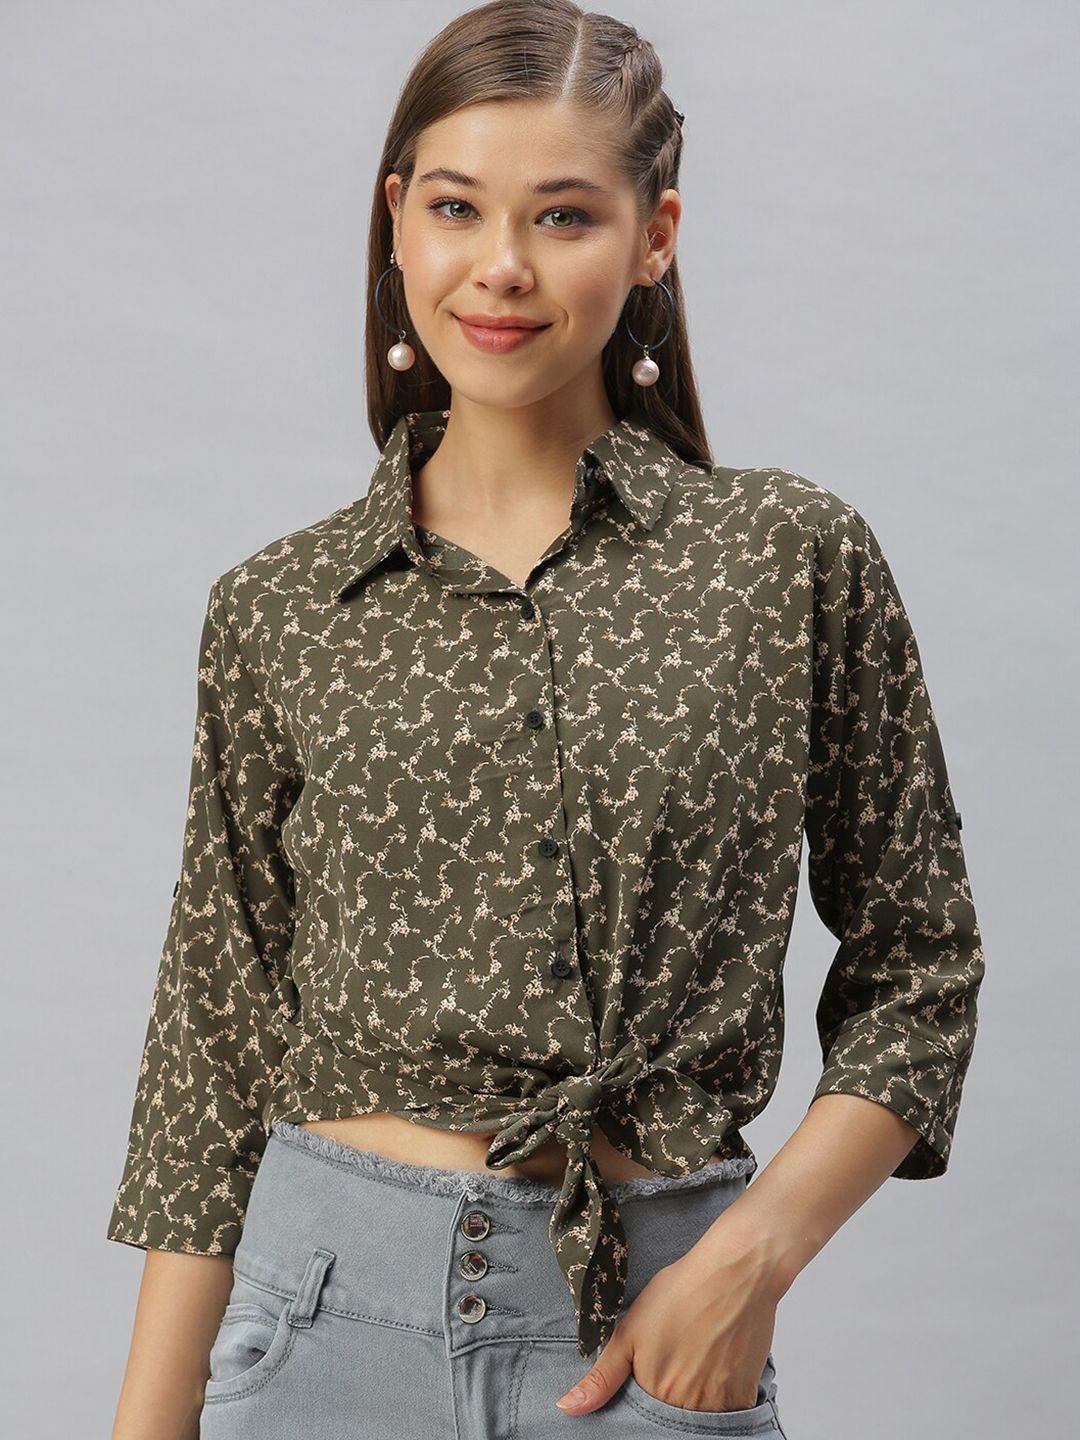 showoff floral printed shirt collar waist tie-ups georgette shirt style top